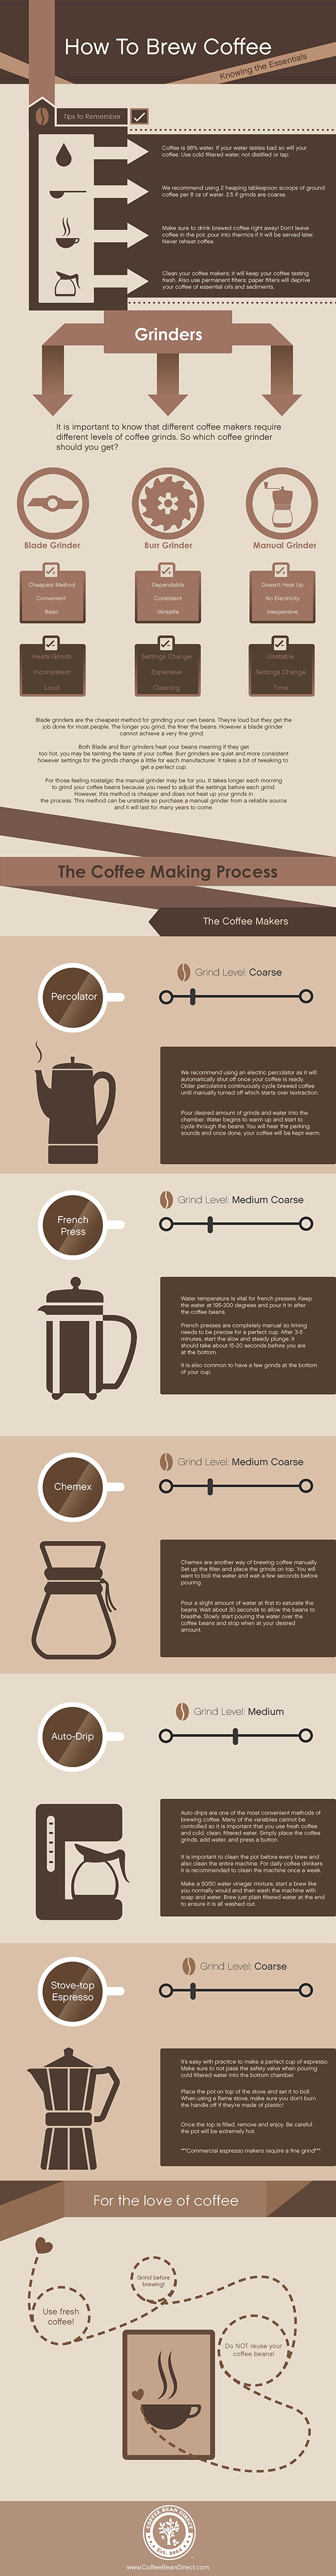 How to brew coffee infographic